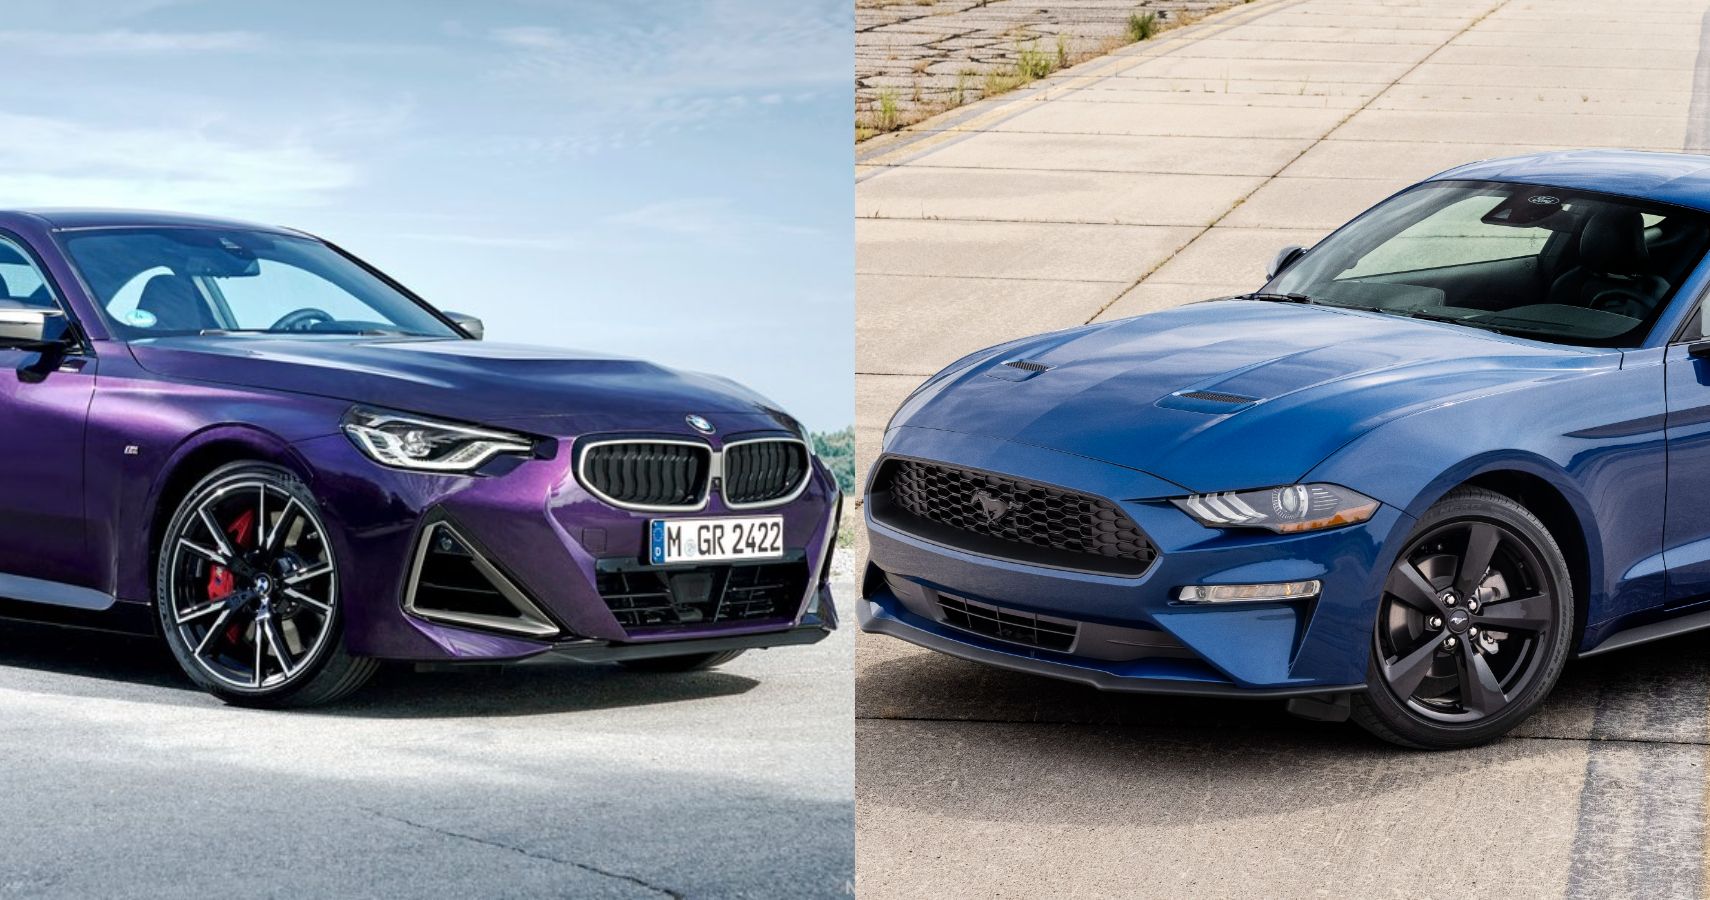 2022 Mustang GT And BMW M240i